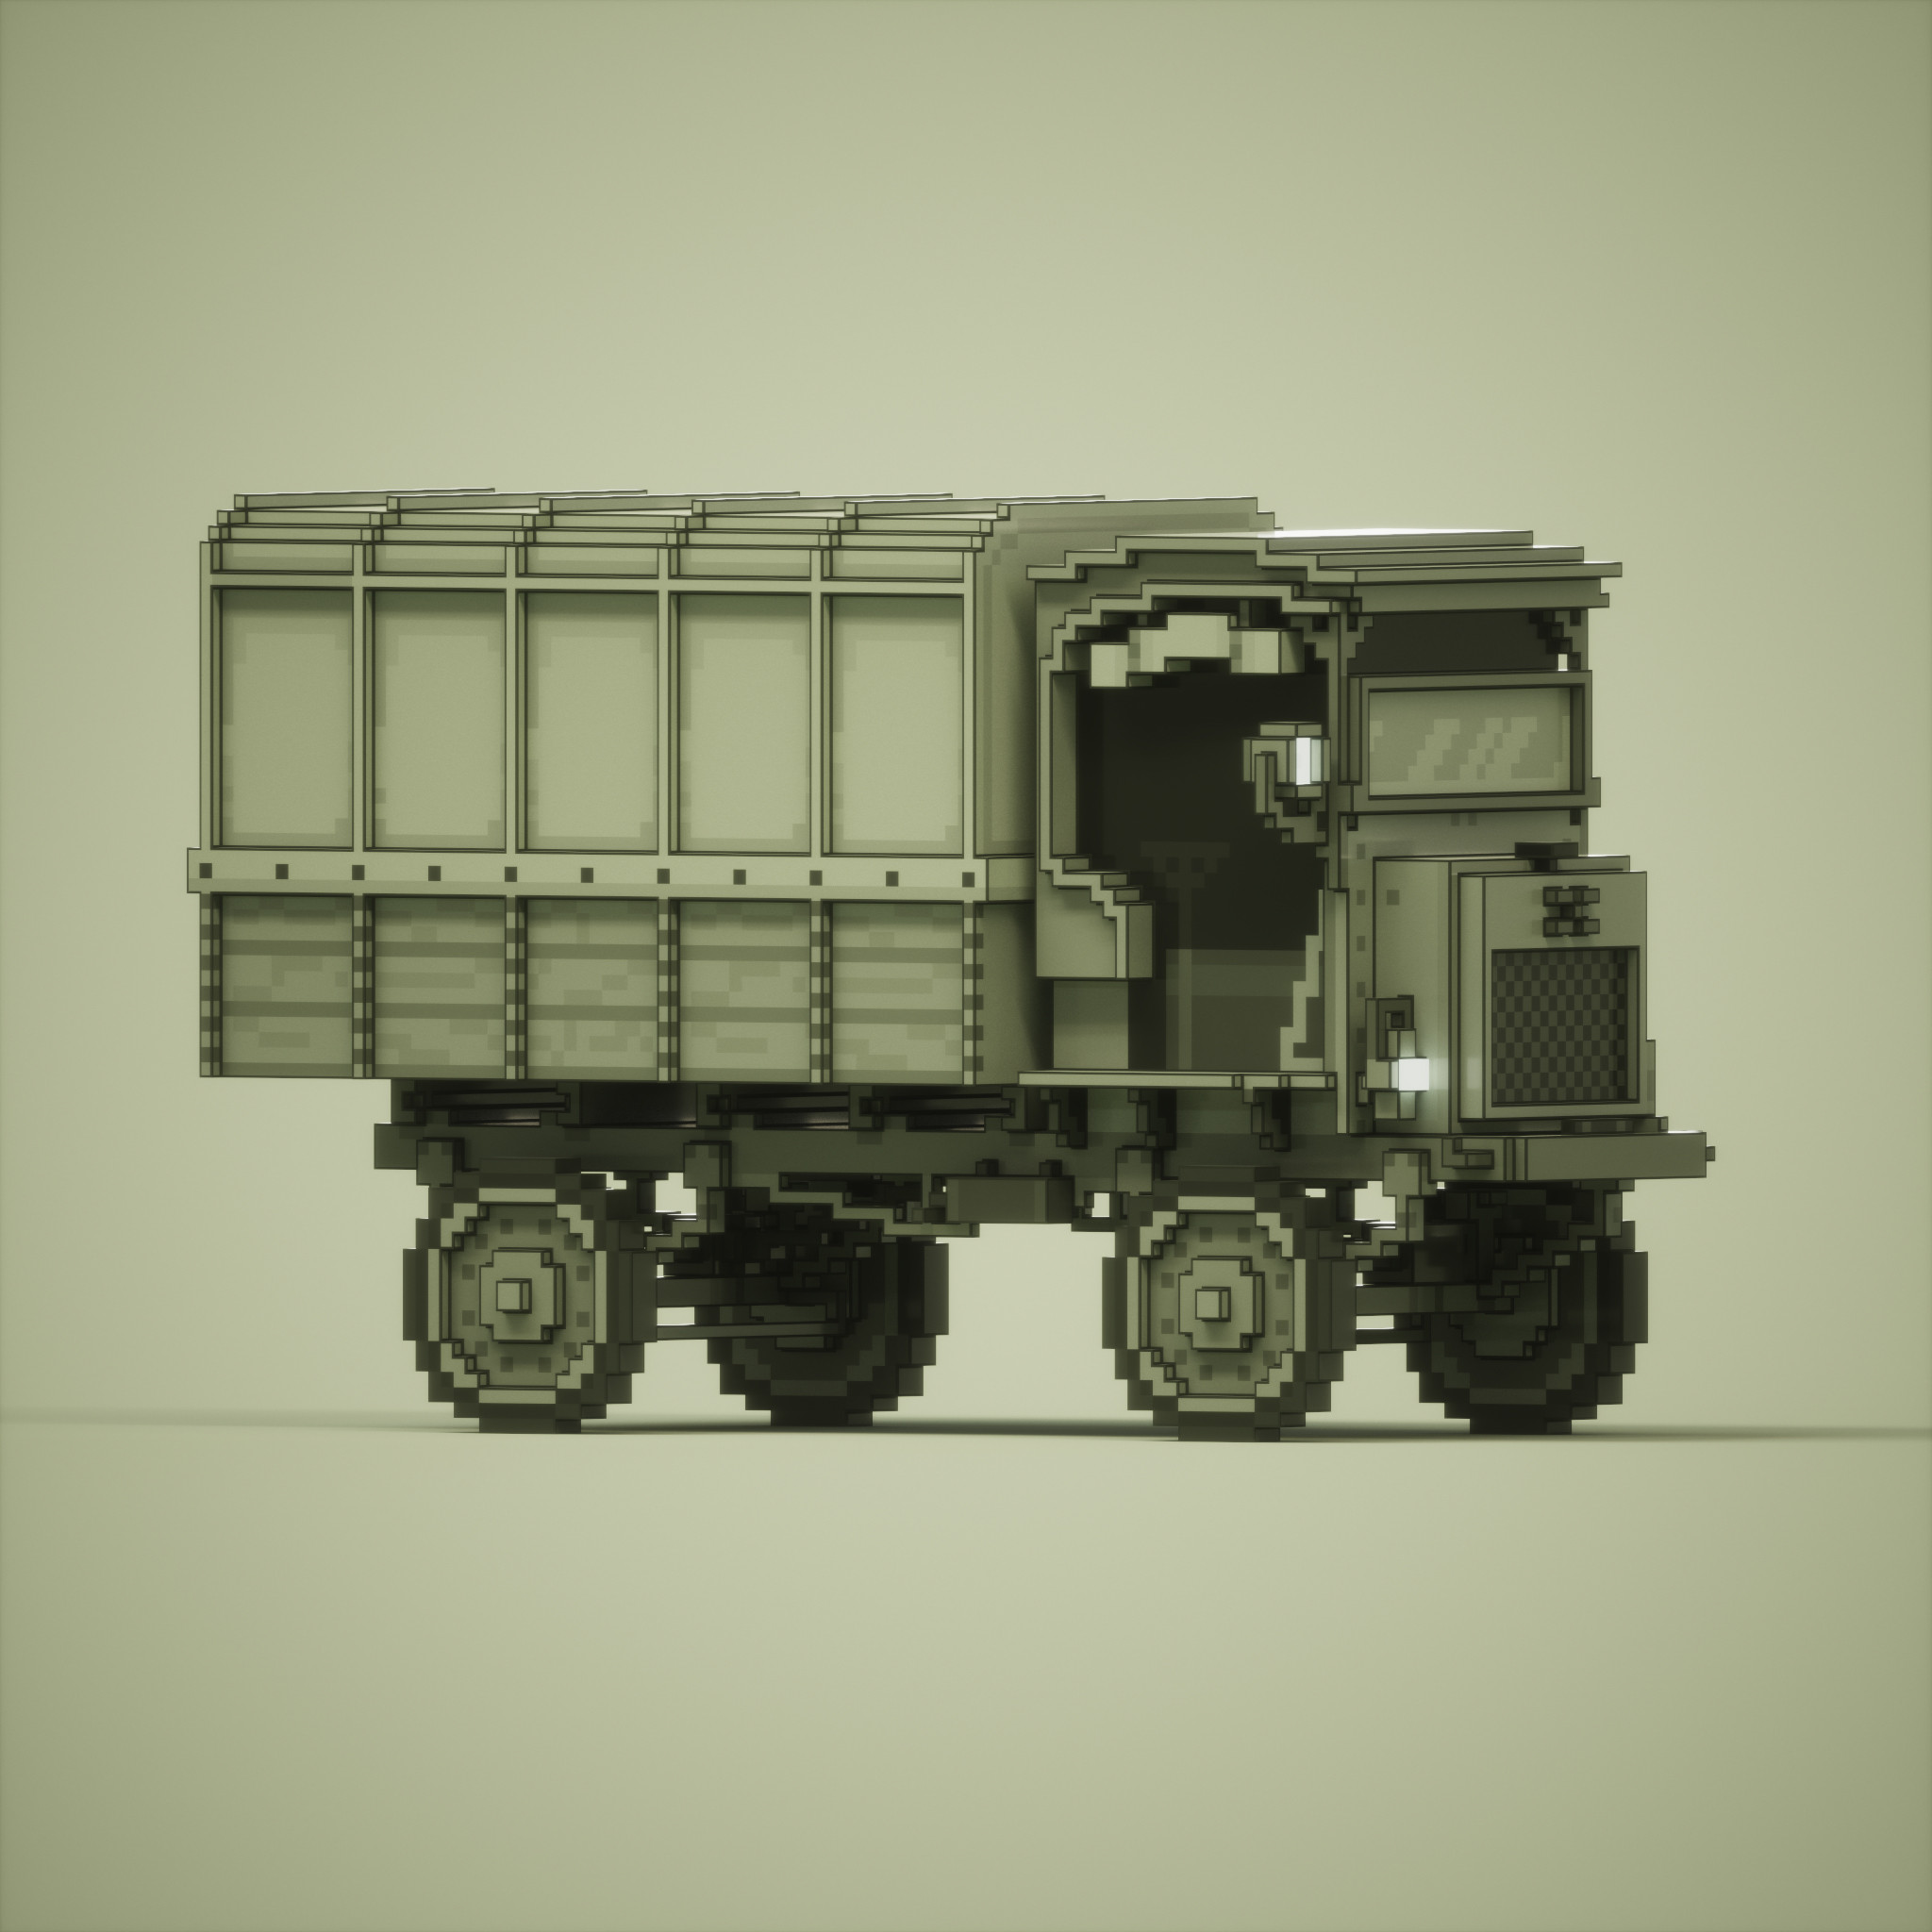 Voxel 1919 Jeffery \ Nash Quad four-wheel drive 1.5 ton-rated truck created and rendered using Magicavoxel.